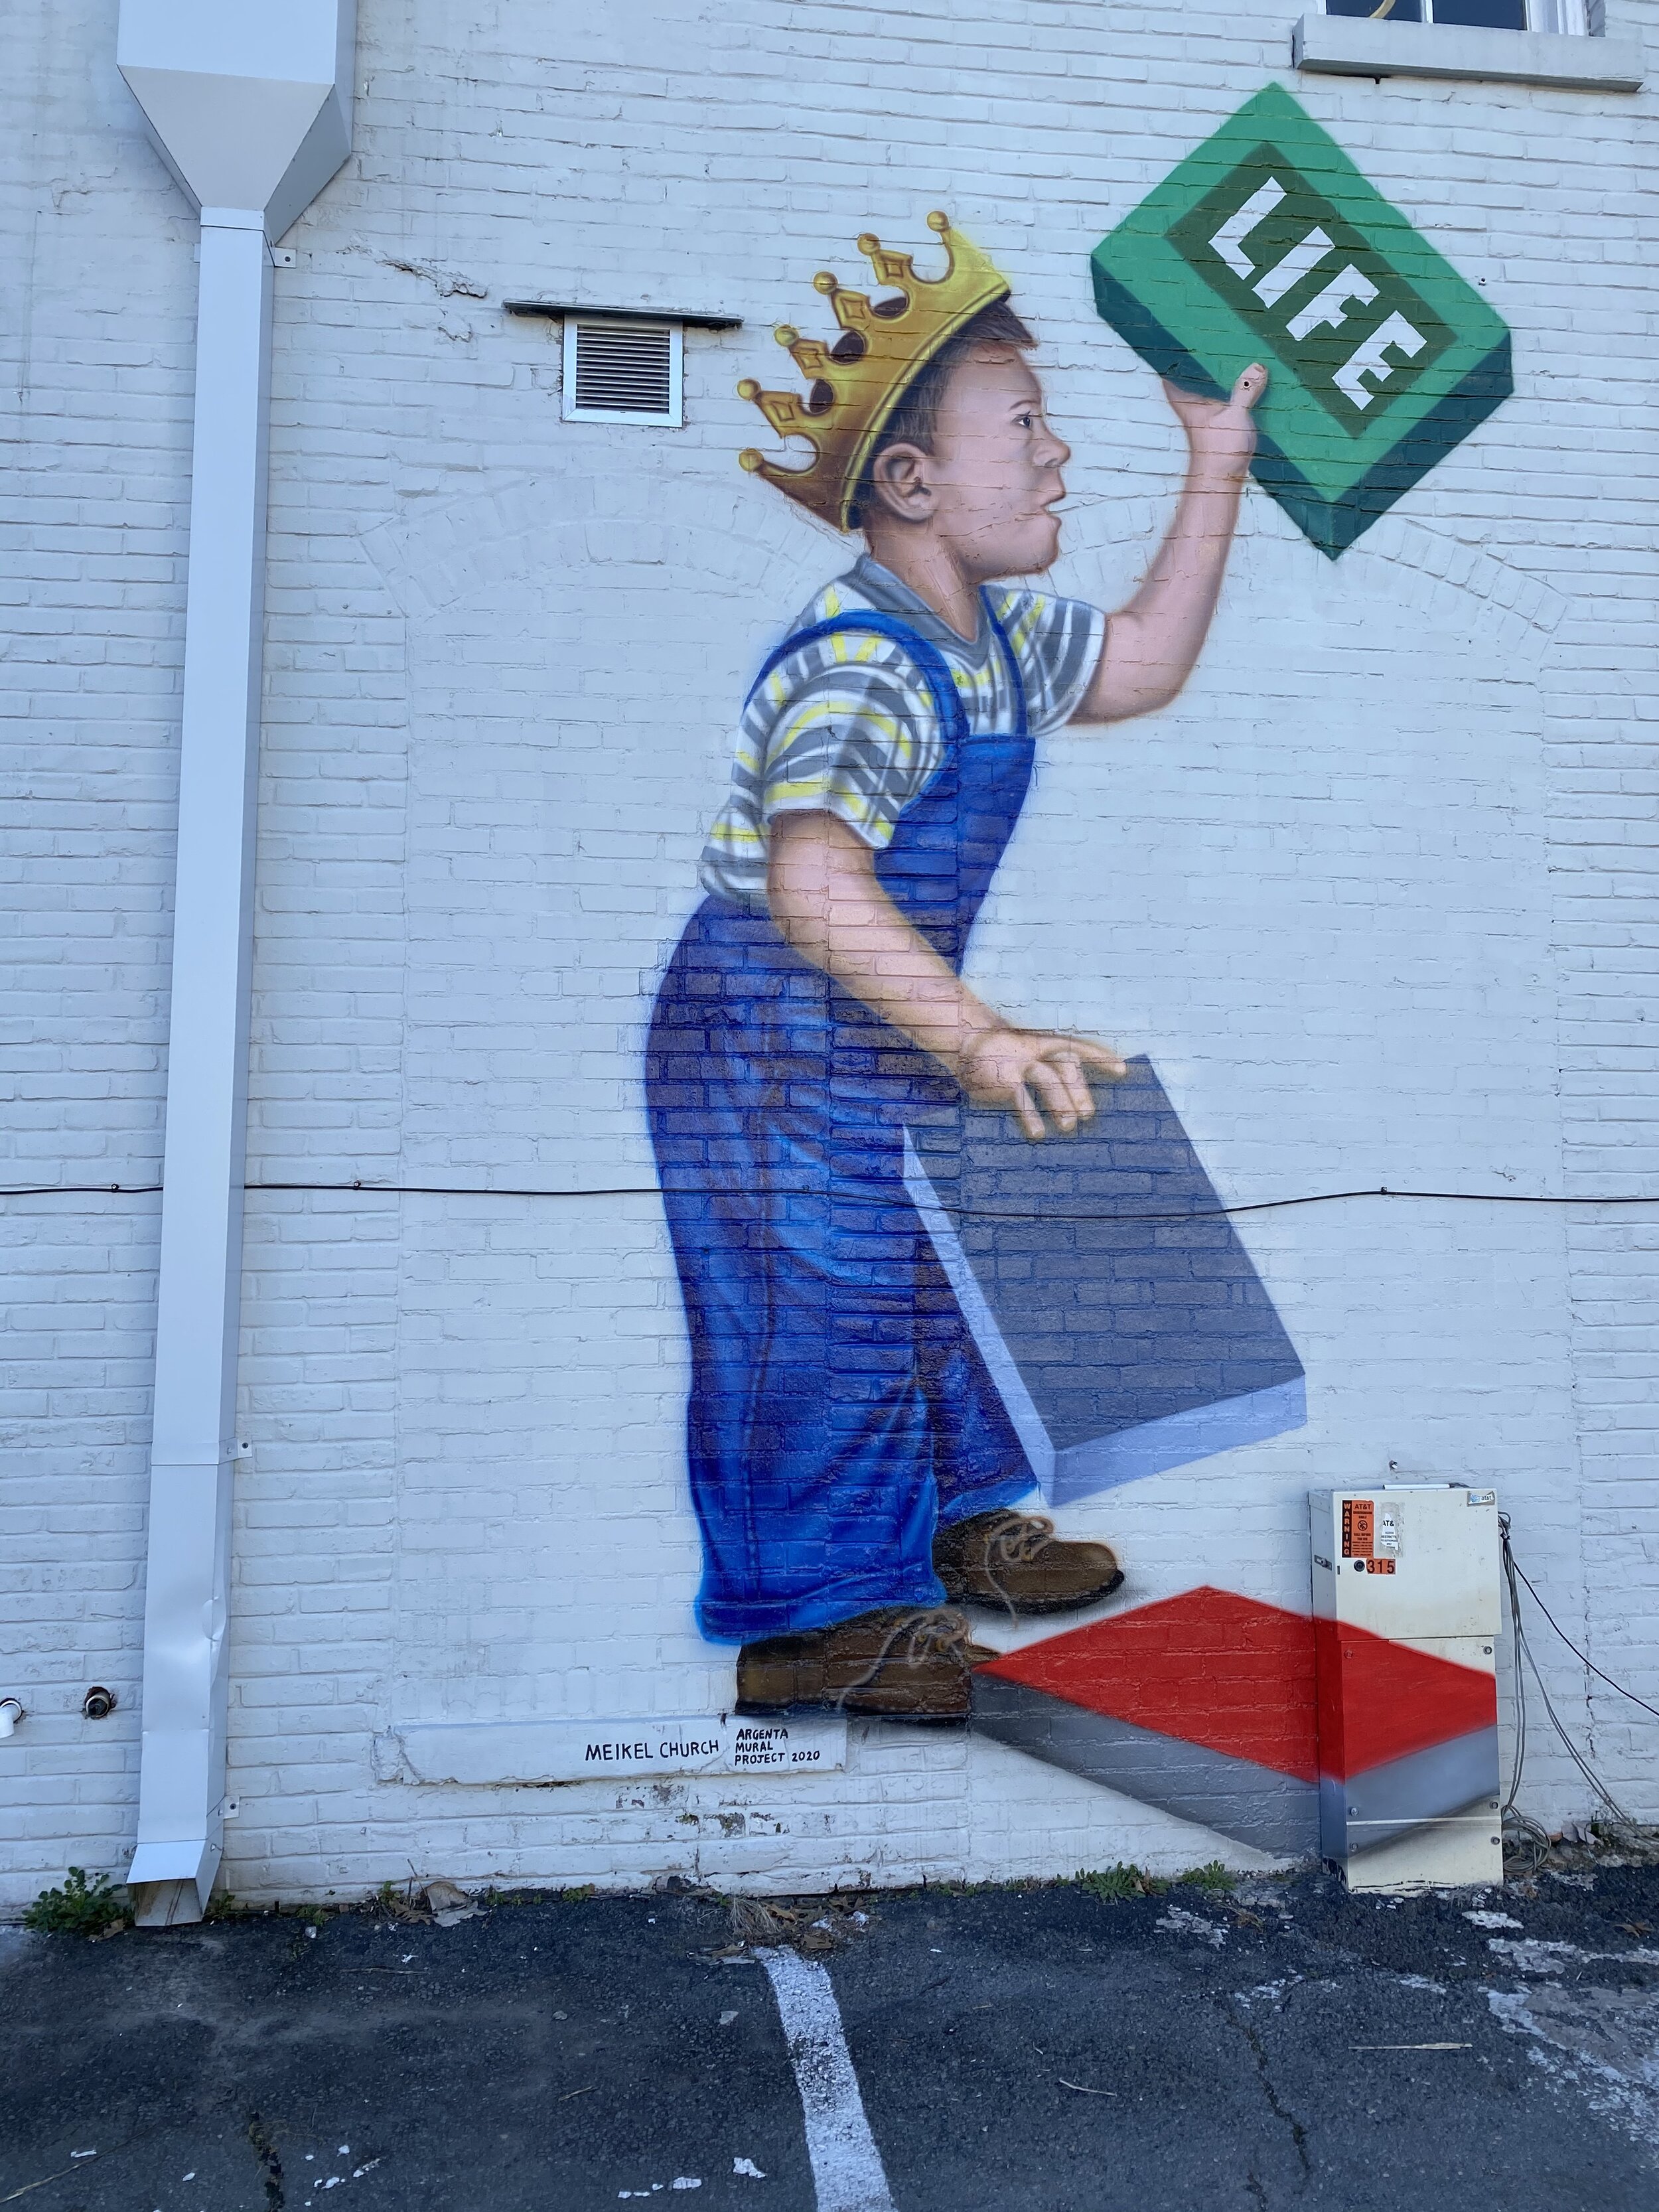    The Gift  , alley behind 321 Main St., North Little Rock, mural by Meikel Church 